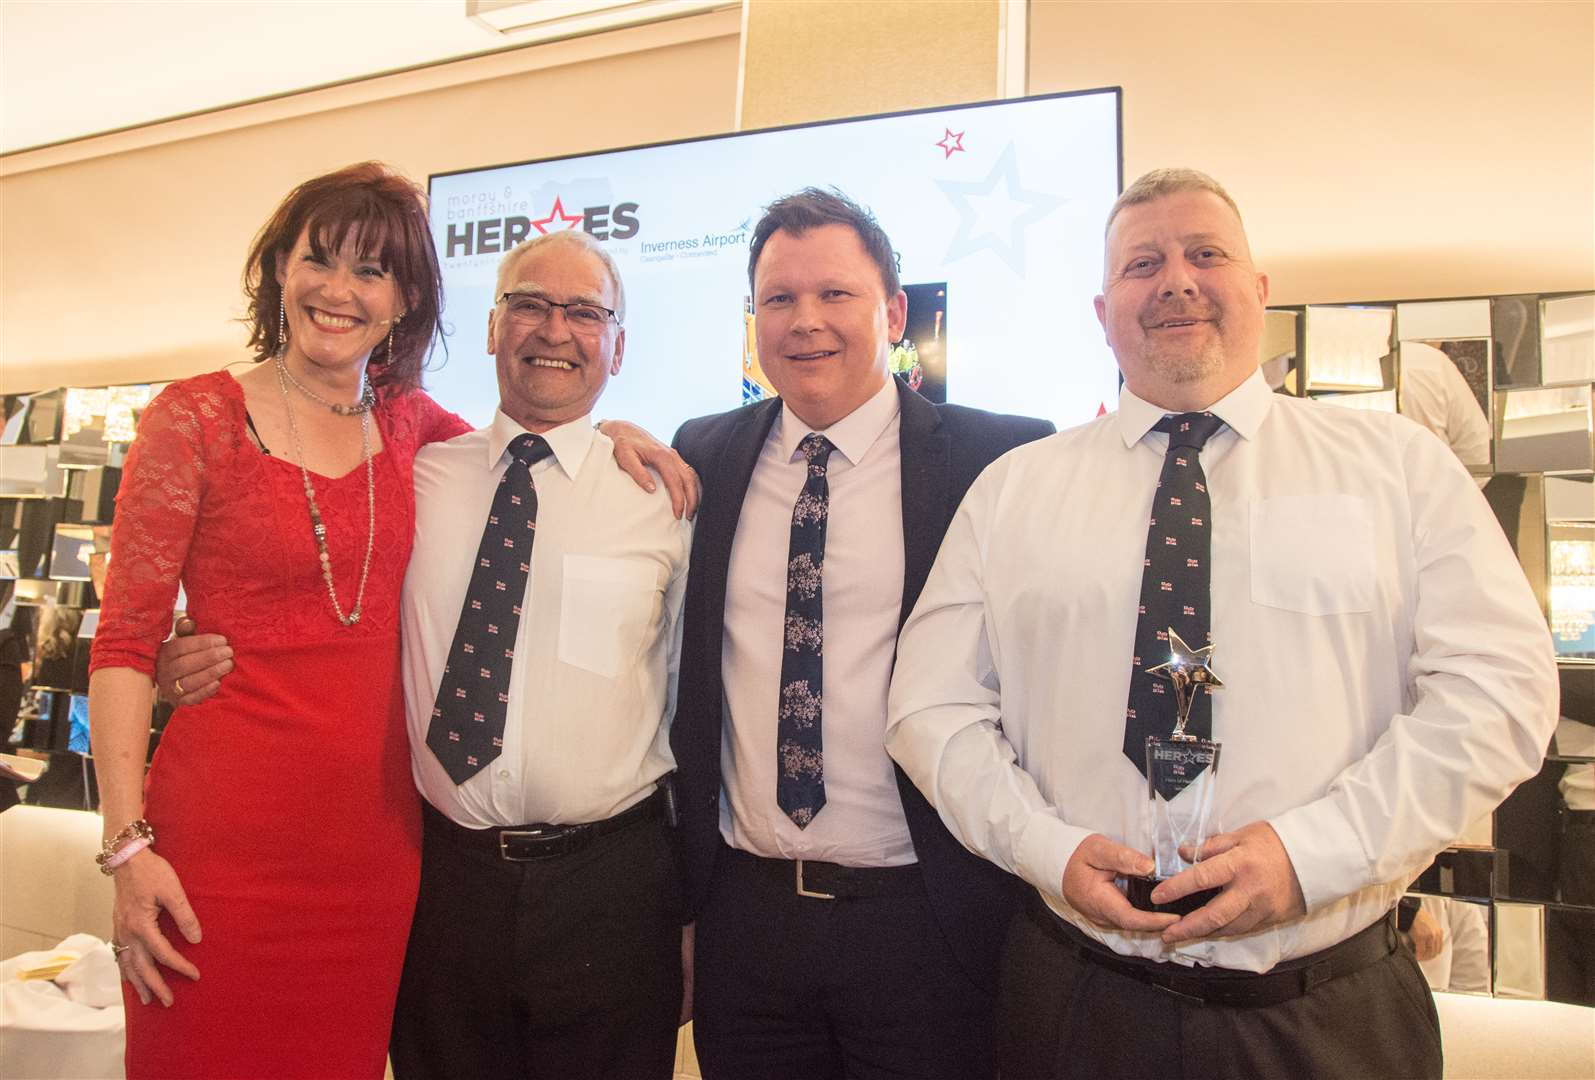 Hero of Heroes award was awarded to Buckie RNLI...Moray & Banffshire Heroes Awards at The Mansfield Hotel, Elgin. ..Picture: Becky Saunderson. Image No.043395.